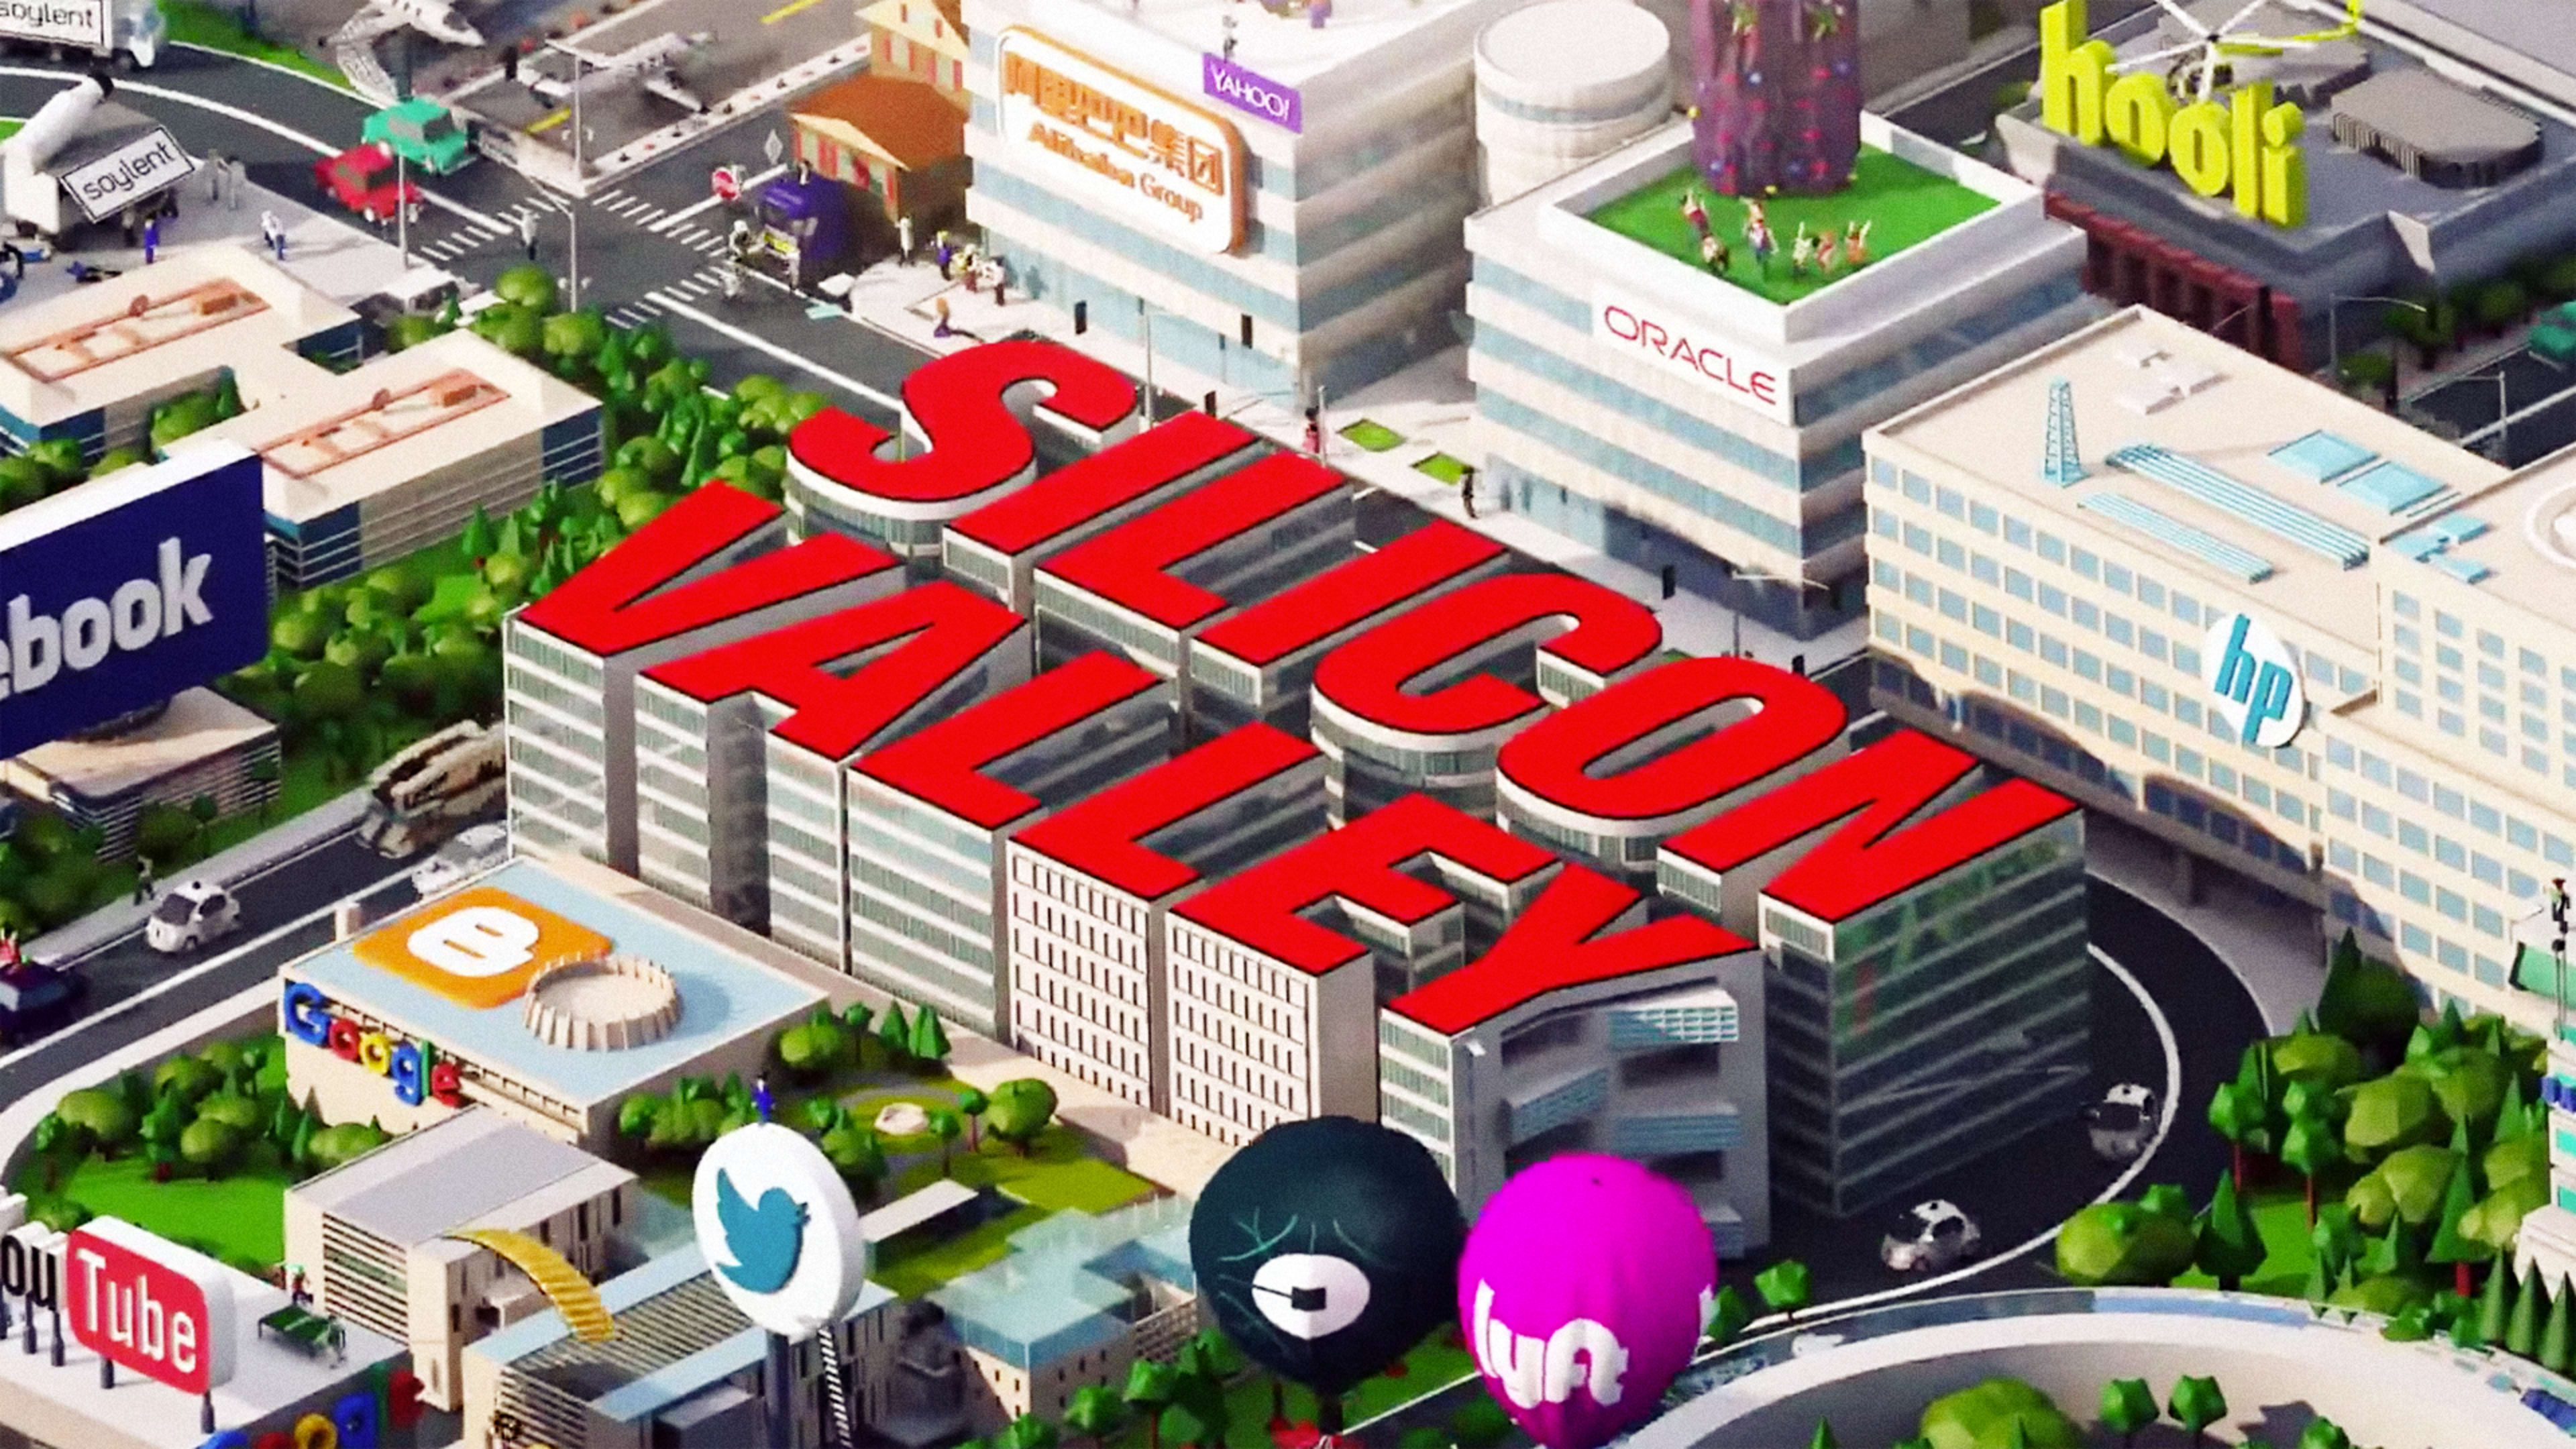 Here’s Every Single In-Joke From The Title Sequences Of “Silicon Valley”